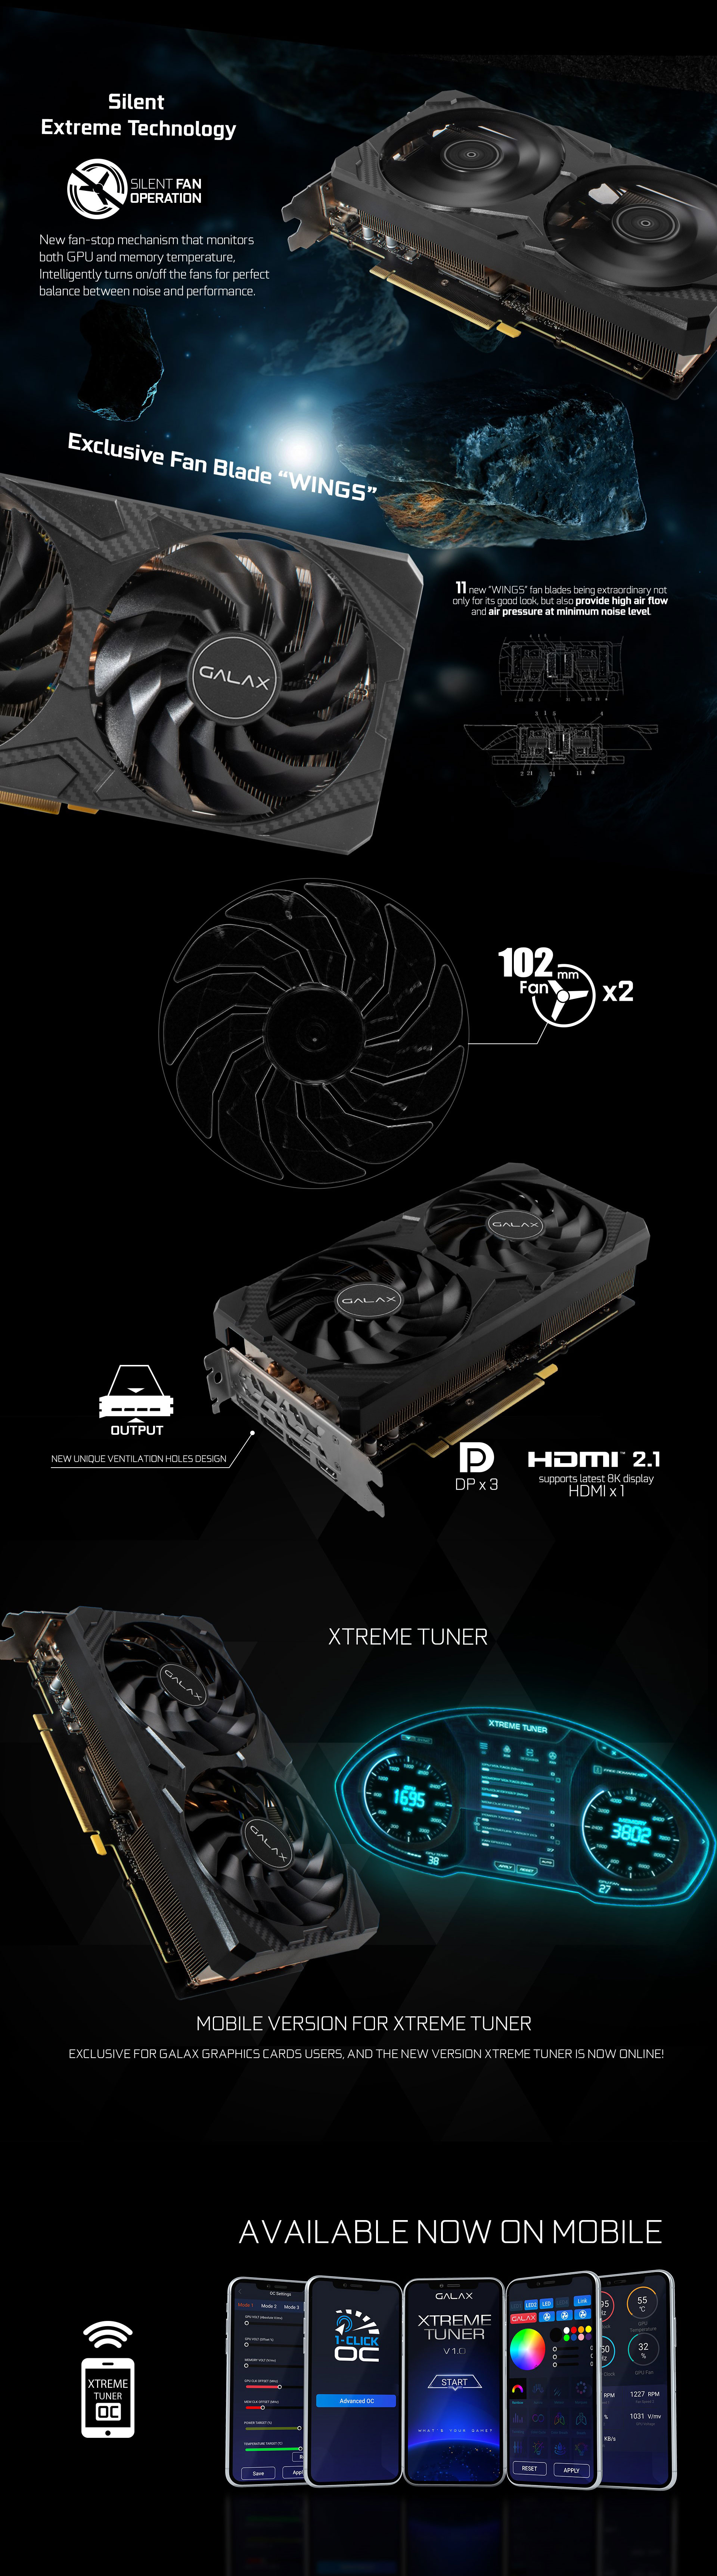 GALAX GeForce RTX™ 3070 Ti (1-Click OC Feature) - Graphics Card